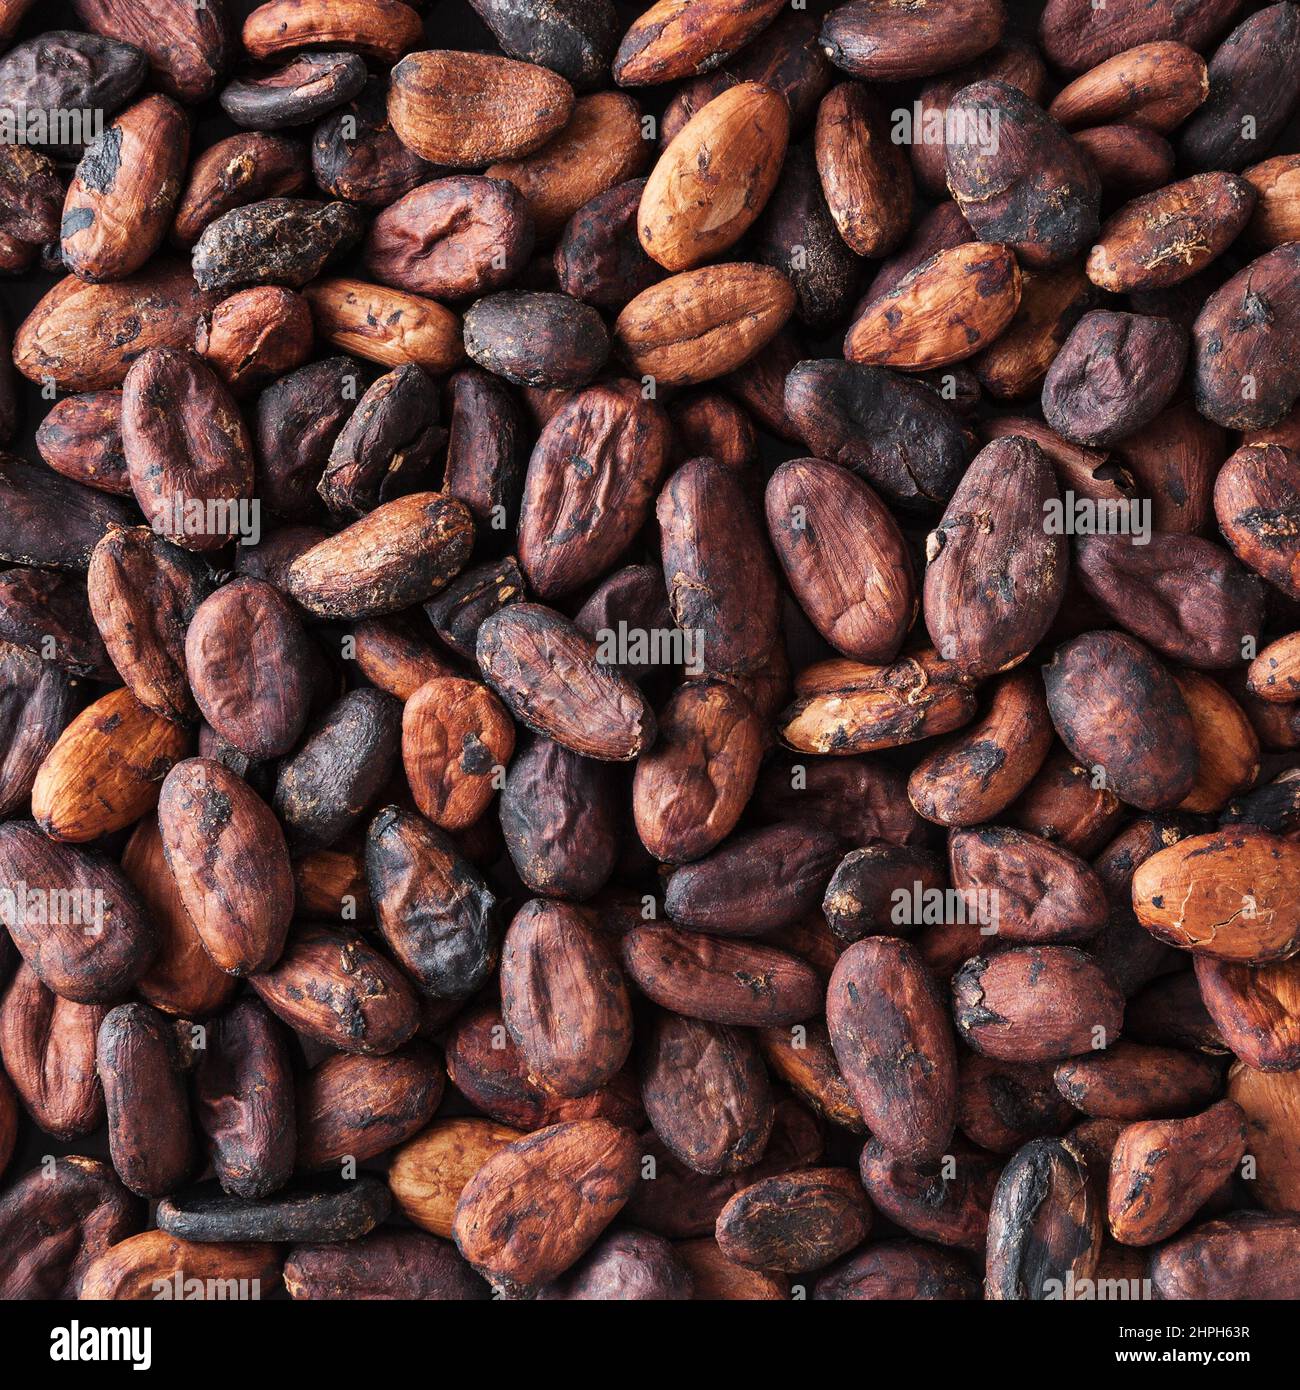 Uncooked cacao beans background Stock Photo